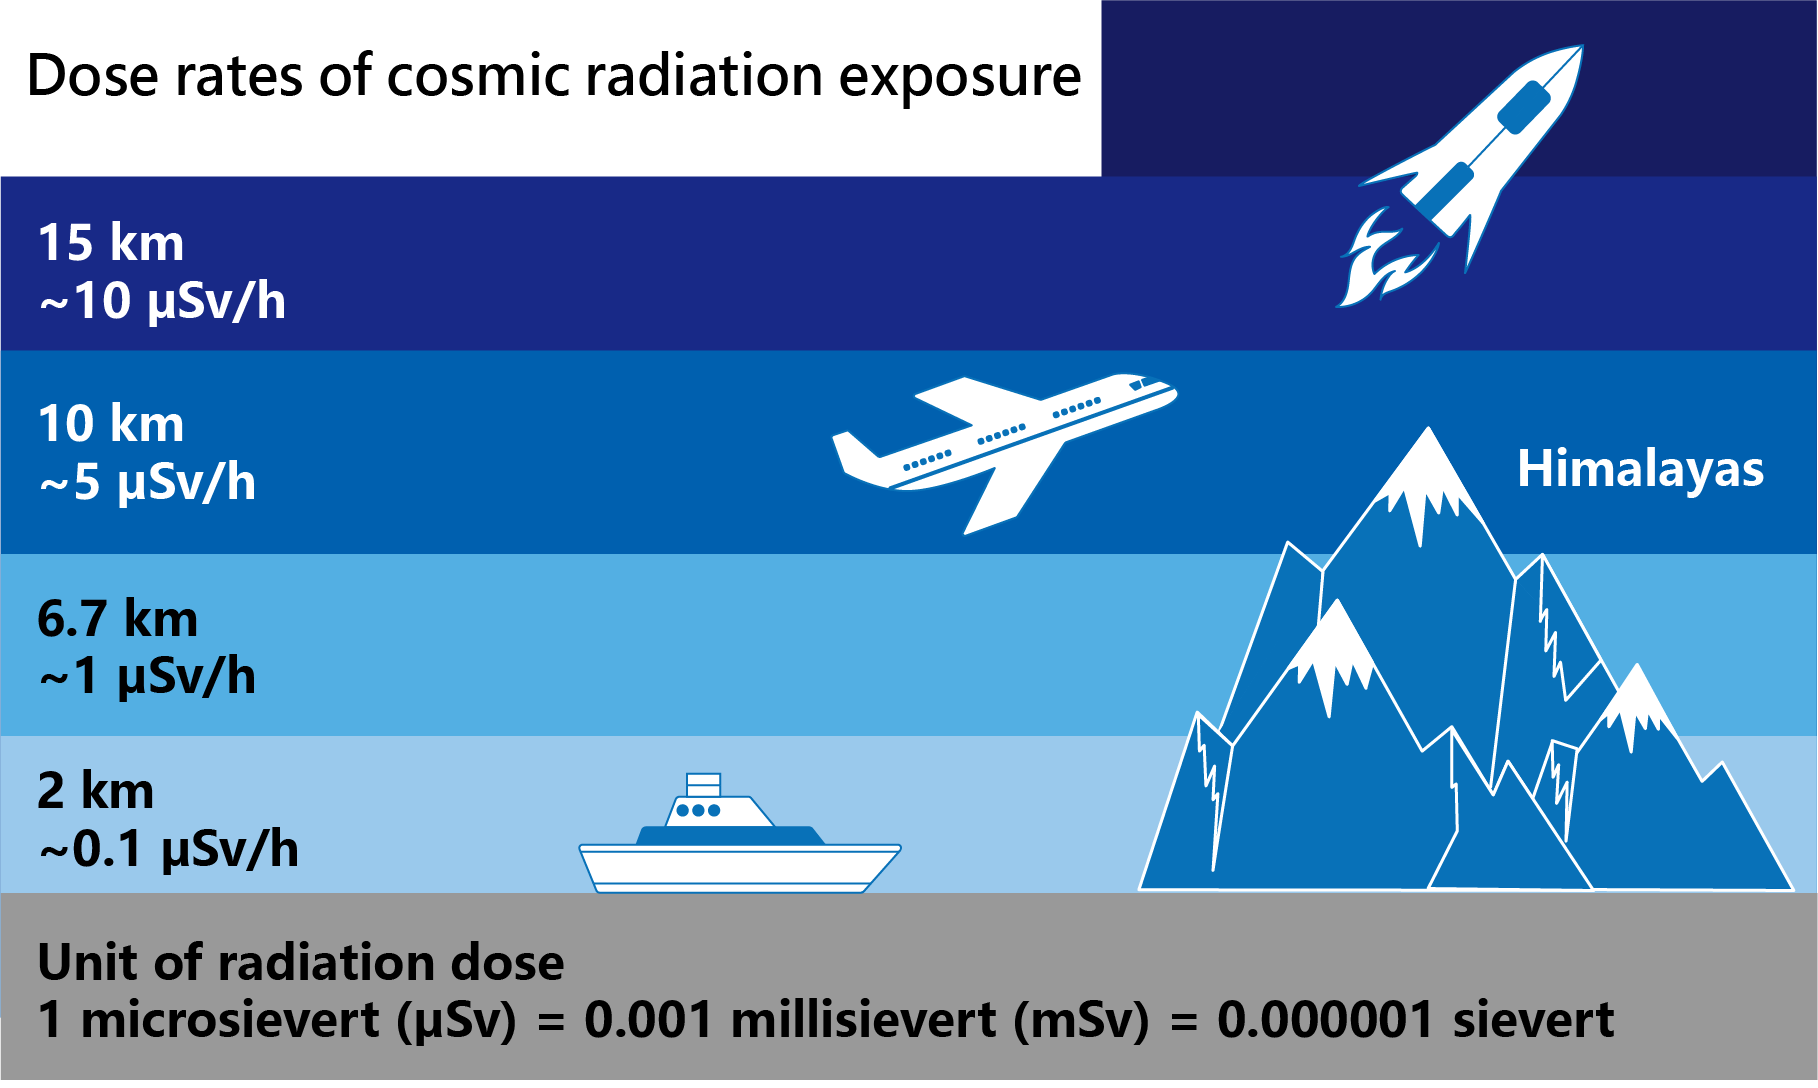 Does rates of cosmic radiation exposure